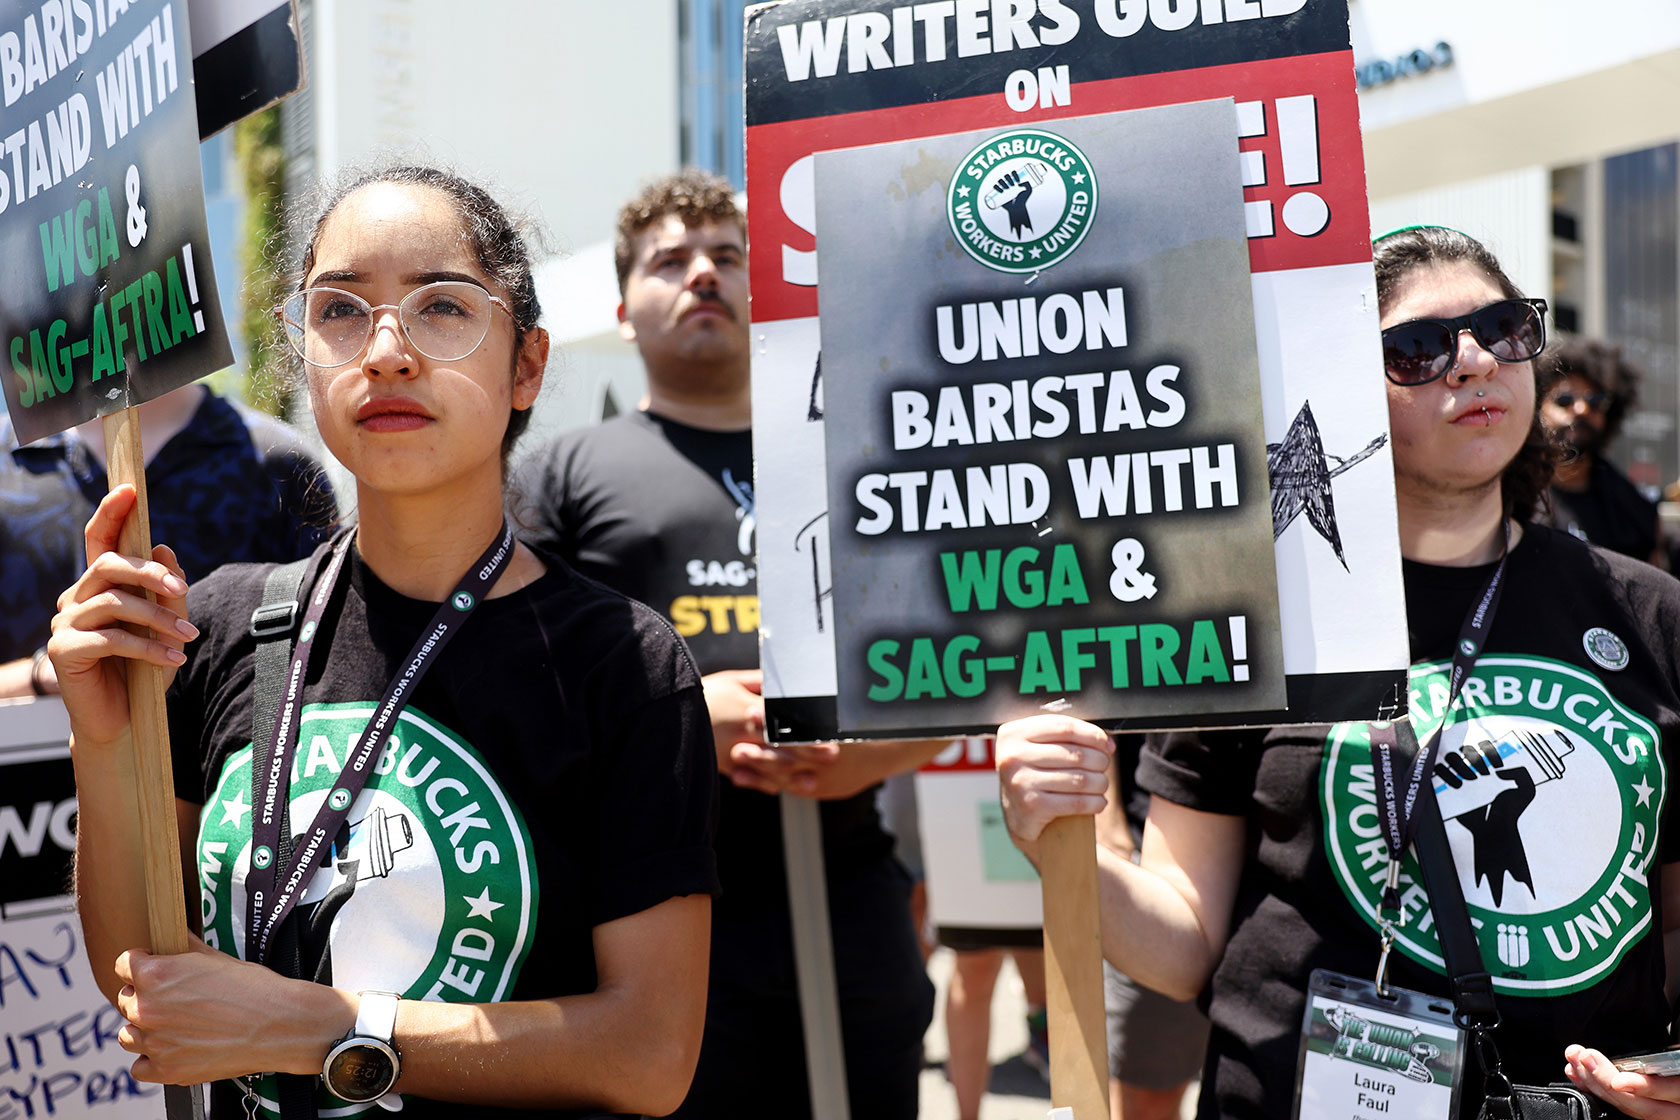 Photo shows a young woman wearing a black Starbucks Workers United shirt, and other Starbucks employees, holding signs supporting the SAG-AFTRA and Writers Guild of America striking workers